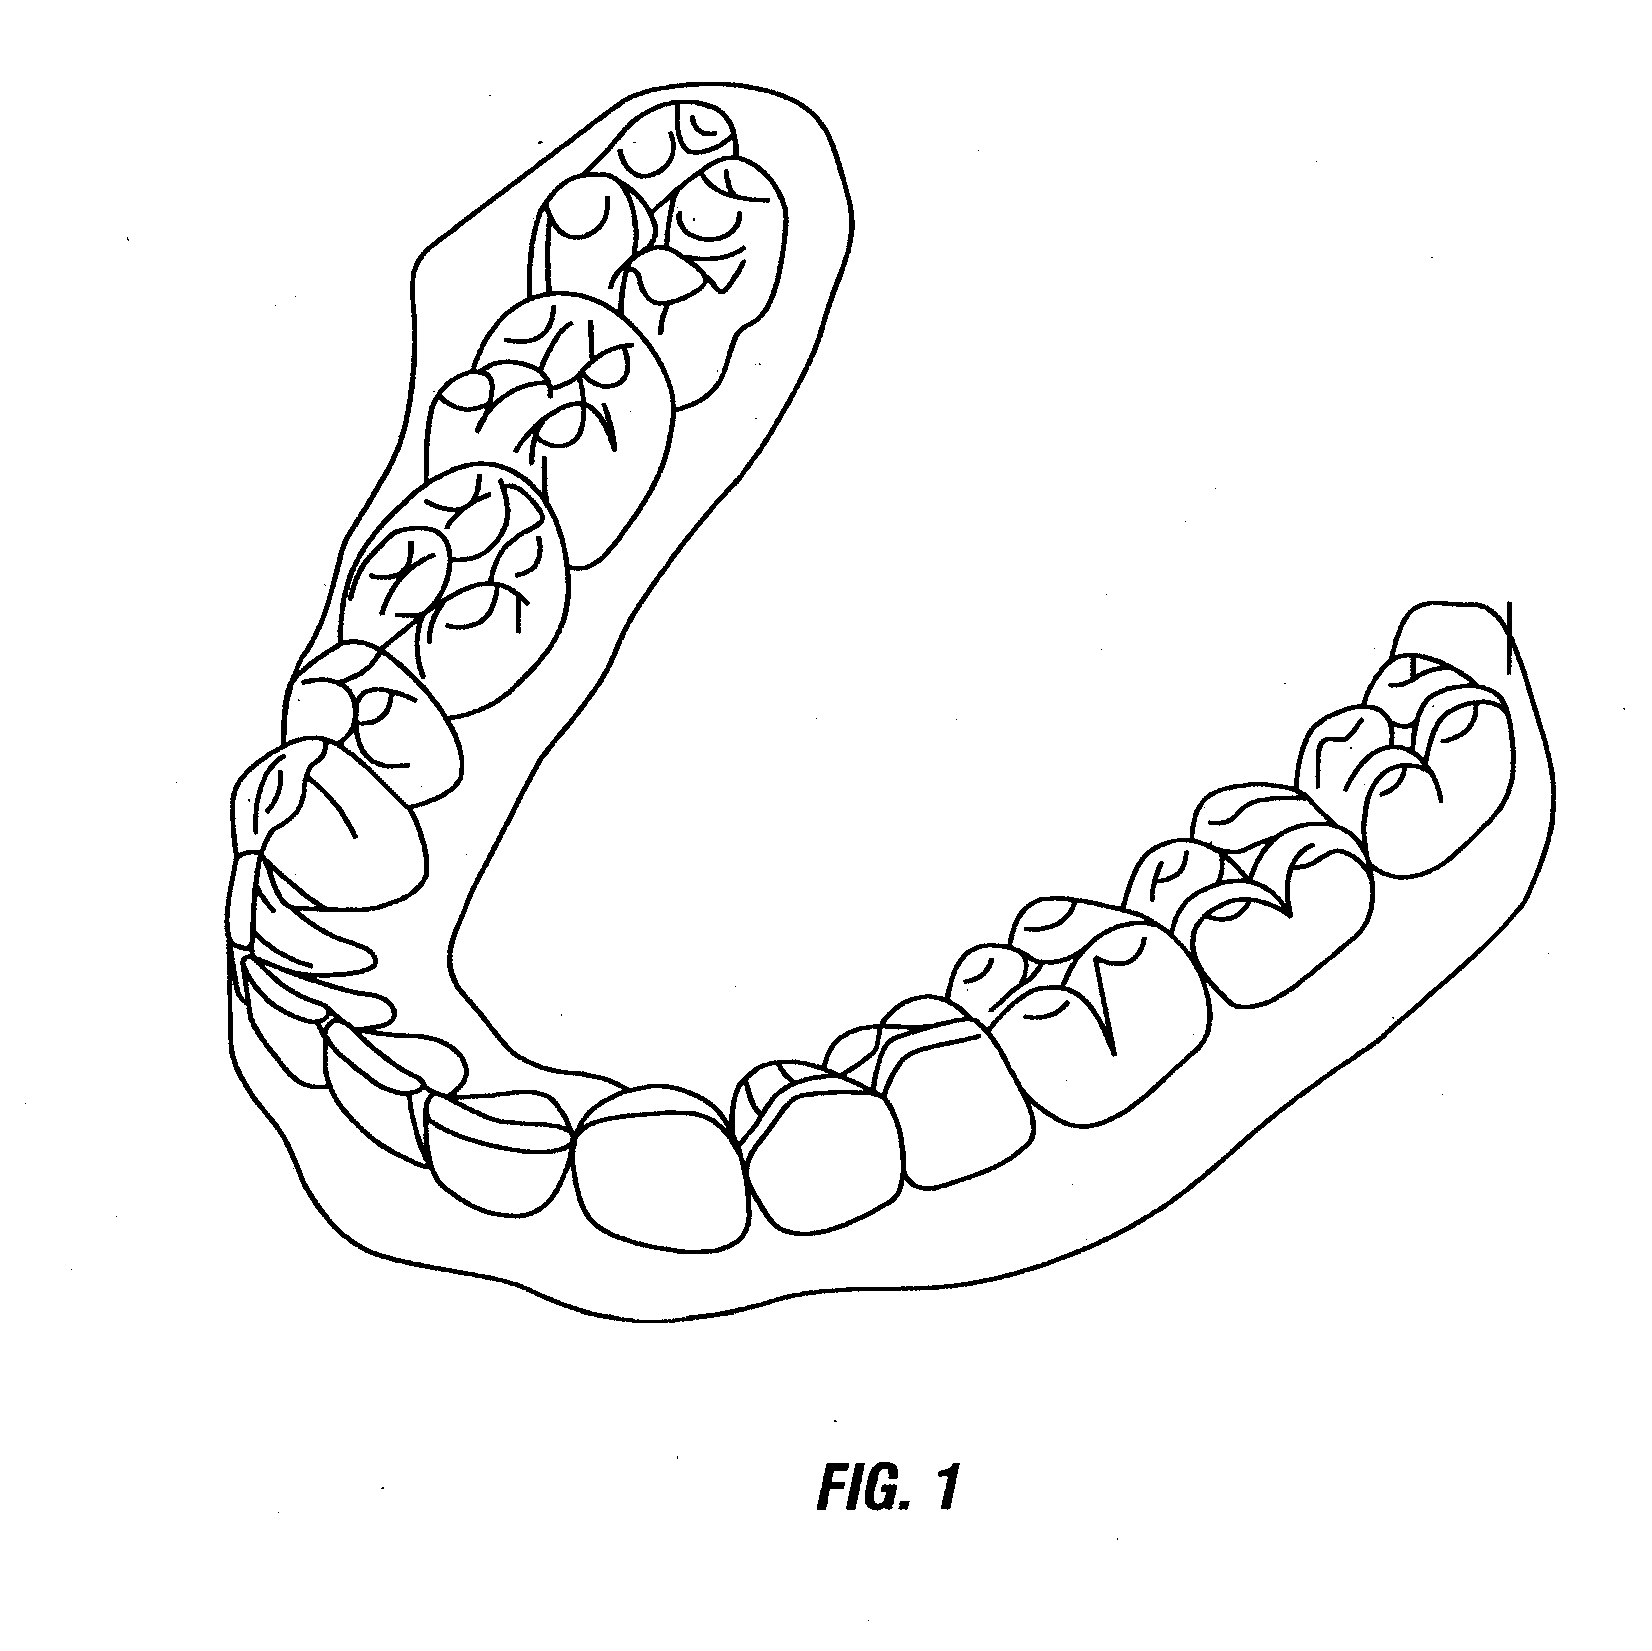 Dental models and series of dental models, and methods and apparatus for making and using same